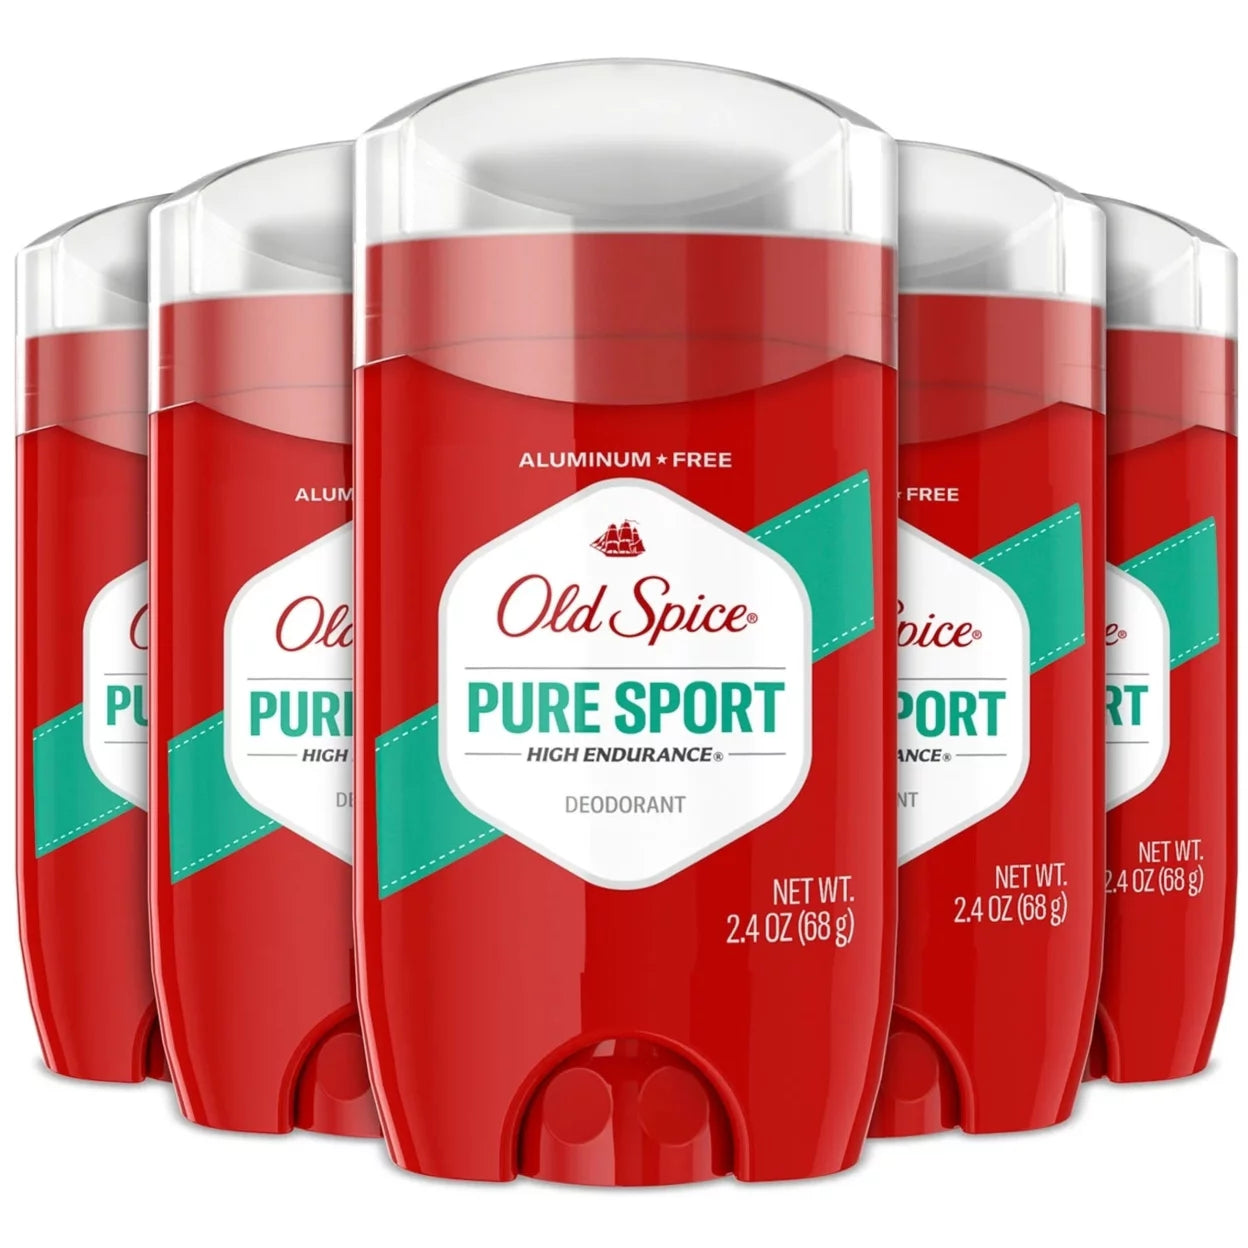 Old Spice High Endurance Deodorant 48 Hour Protection Pure Sport, 2.4oz 5pk